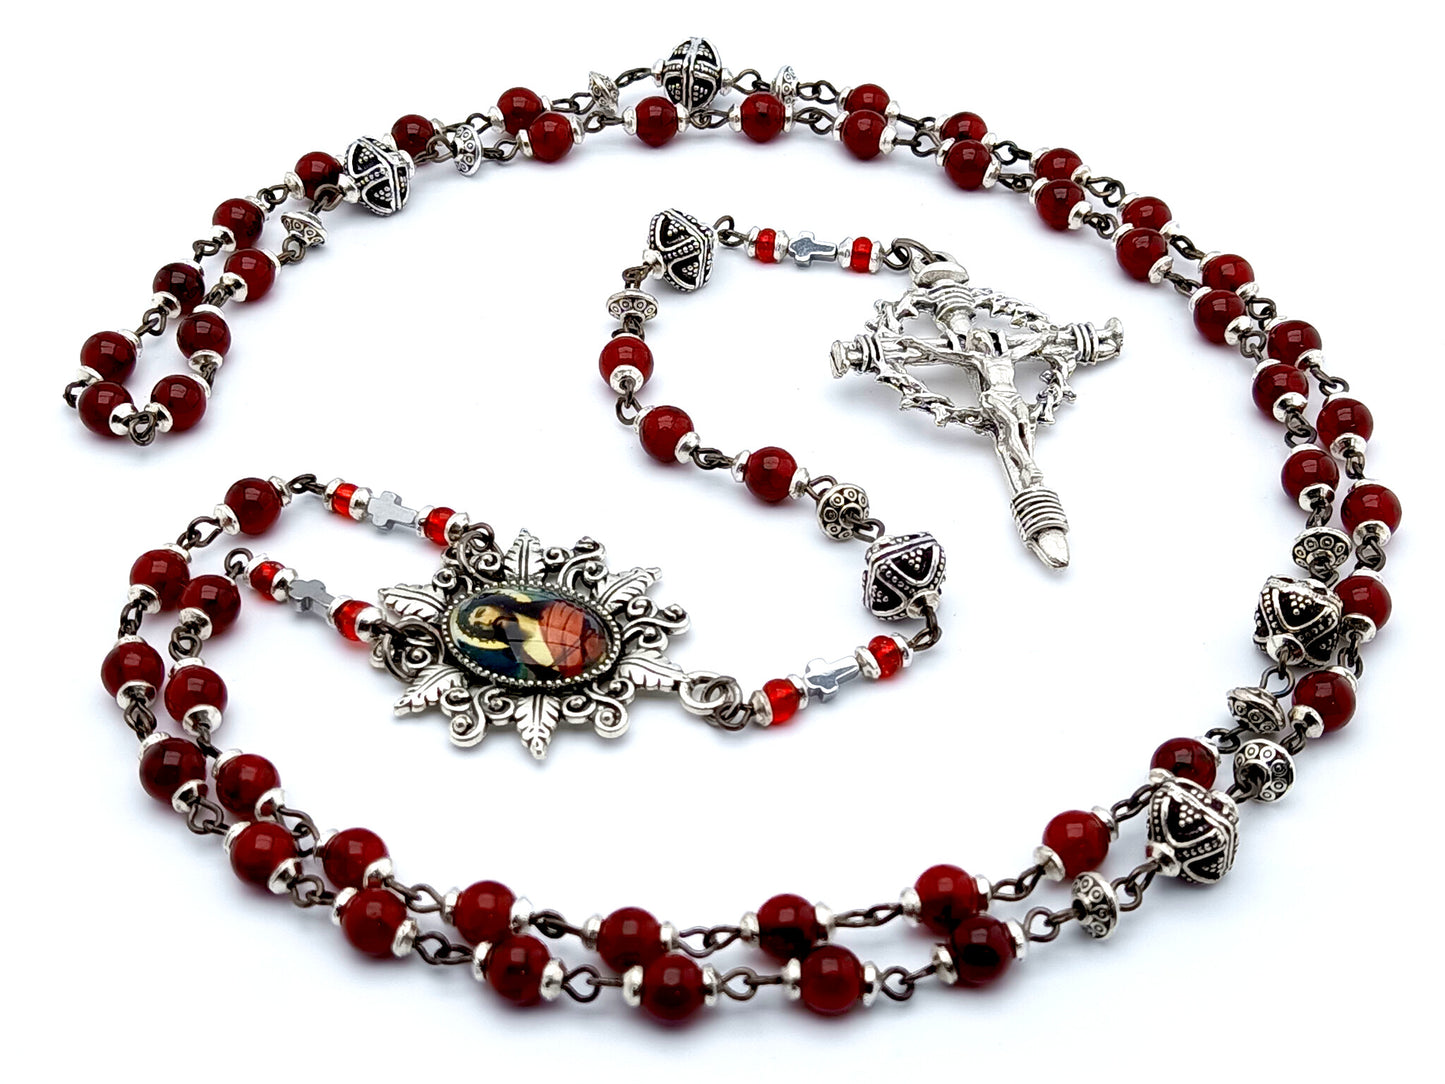 Crowning with Thorns unique rosary beads with deep red glass and silver beads, silver nail crucifix and picture centre medal.